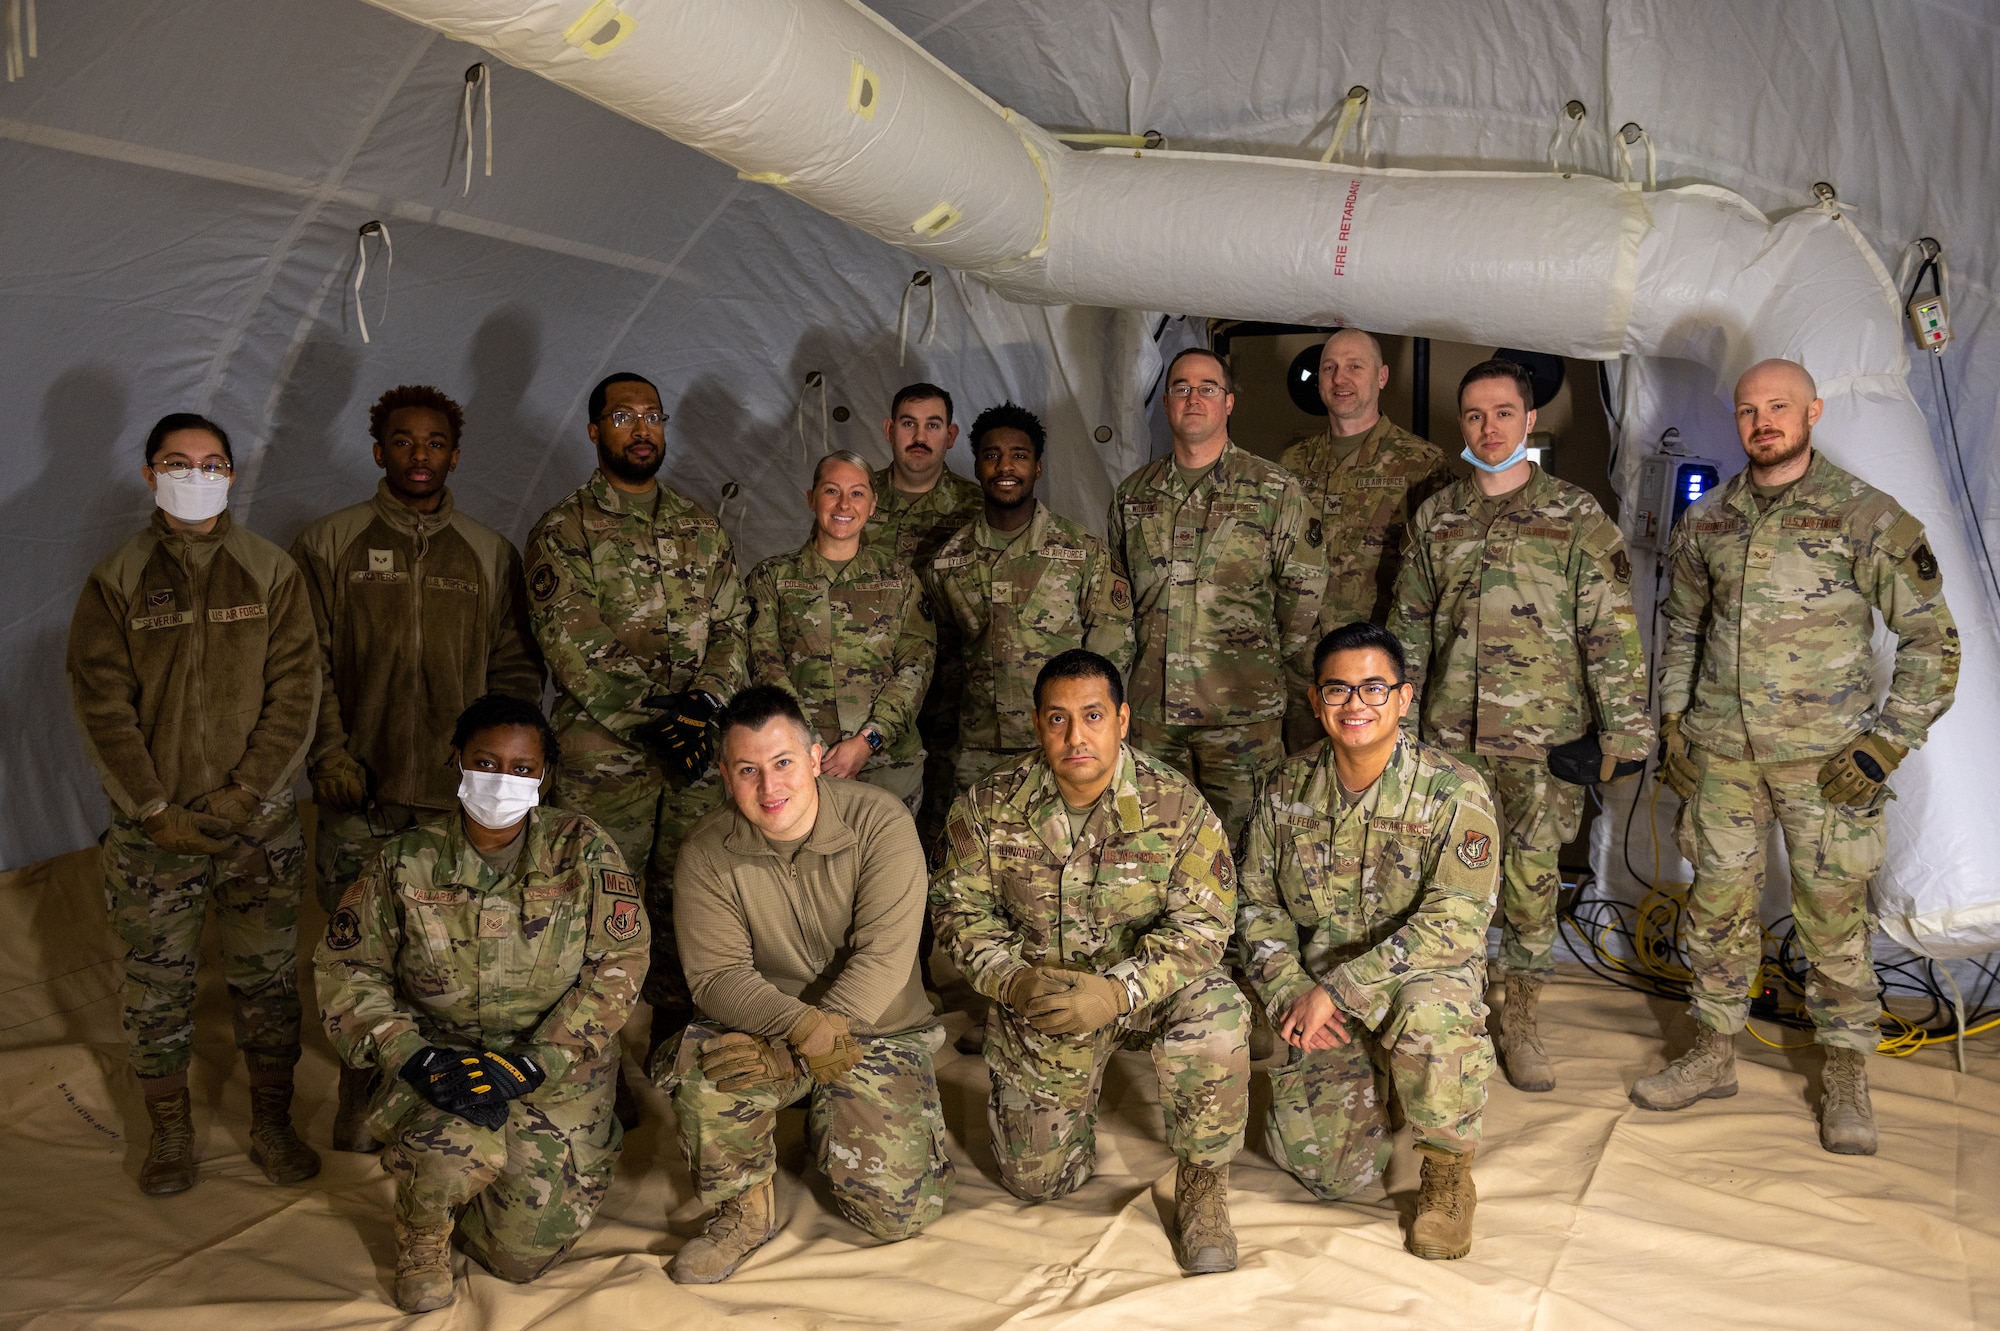 Members of the 51st Medical Group pose for a photo inside a fully pressurized Tent Kit 2 (TK2) expeditionary medical support shelter while participating in a training event at Osan Air Base, Republic of Korea, Jan. 12, 2023.